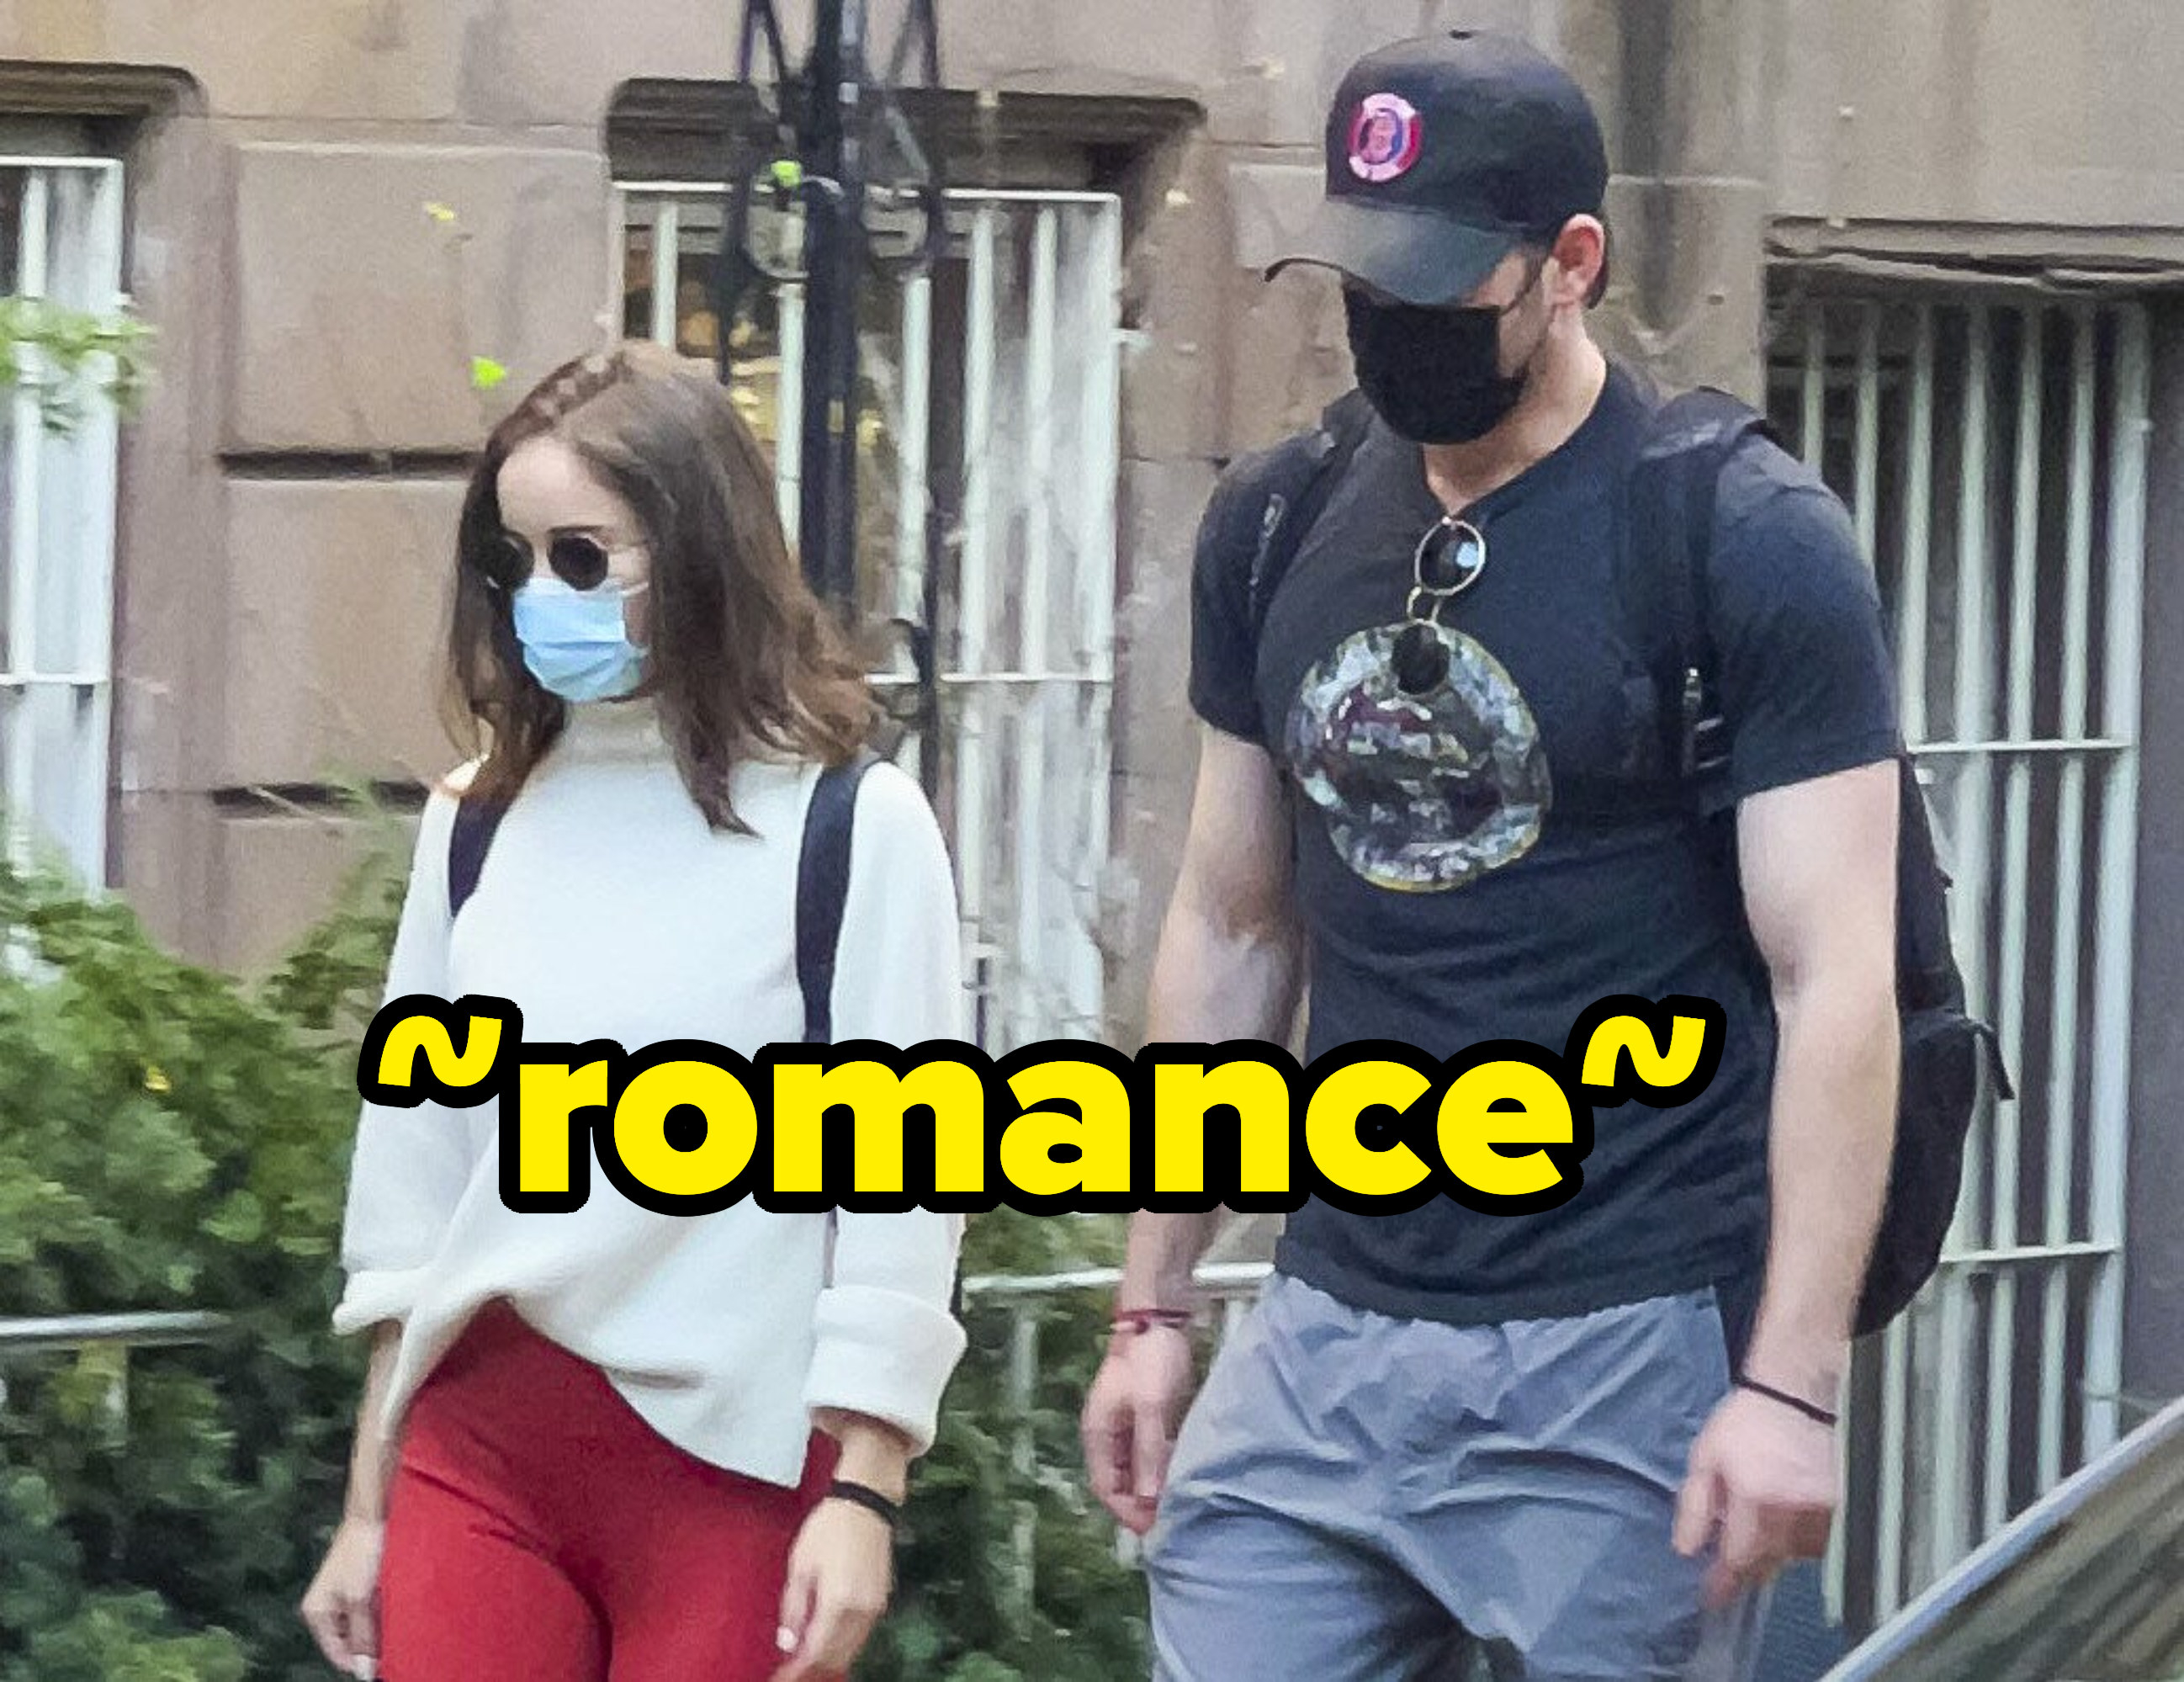 The couple, both wearing face masks, taking a walk